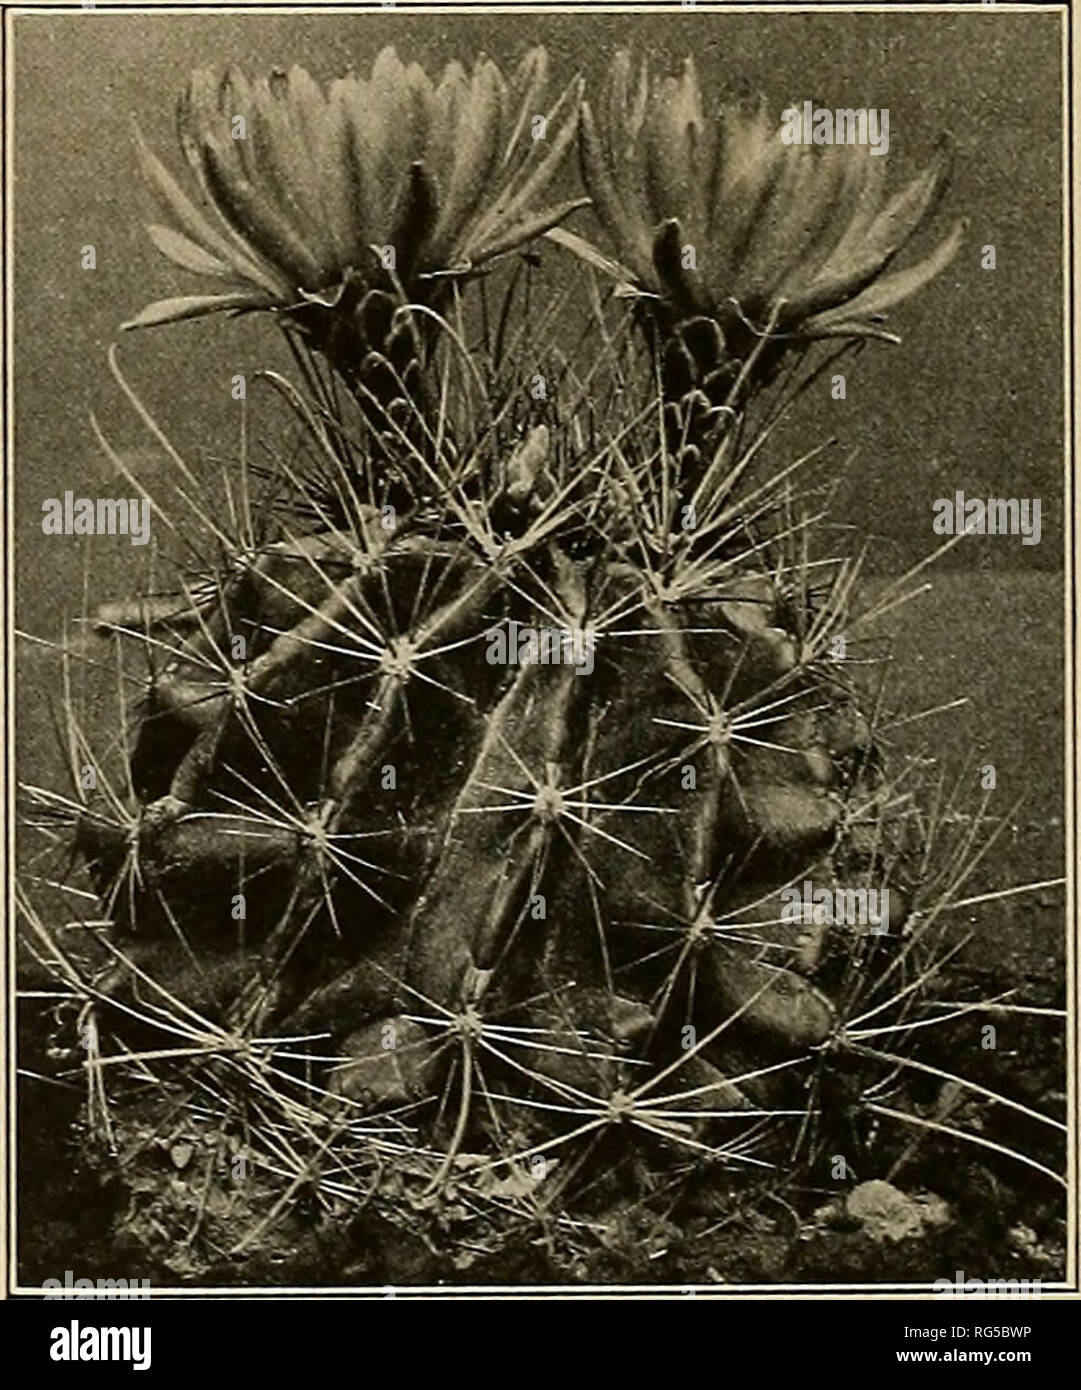 . The Cactaceae : descriptions and illustrations of plants of the cactus family. . Figs, iio and in.—Fruit and flower of Fig. 112.—Hamatocaetus setispinus. Hamatocactus setispinus. X0.8. 1. Hamatocactus setispinus (Engelmann). Echinocactus setispinus Engelmann, Bost. Journ. Nat. Hist. 5: 246. Echinocactus muehlenpfordtii Fennel, Allg. Gartenz. 15: 65. 1847. Echinocactus hamatus Miihlenpfordt, Allg. Gartenz. 16: 18. 1848. Not Forbes, 1837. Echinocactns setispinus hamatus Engelmann, Bost. Journ. Nat. Hist. 6: 201. 1850. Echinocactus setispinus setaceus Engelmann, Bost. Journ. Nat. Hist. 6: 201.  Stock Photo